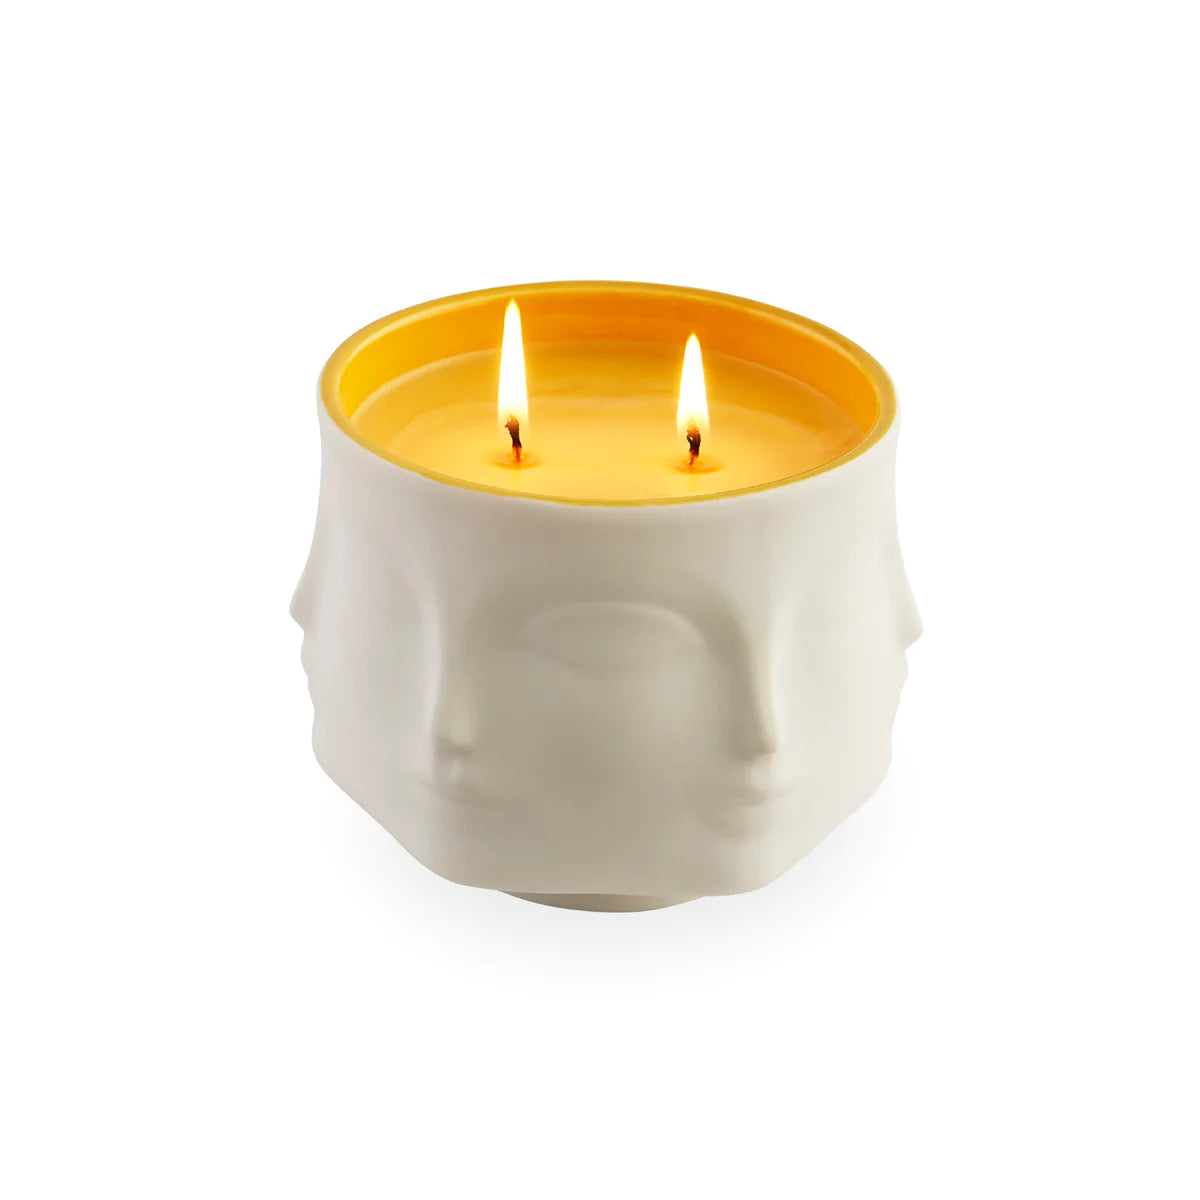 Muse Couleur Pamplemousse Candle. Jonathan Adler